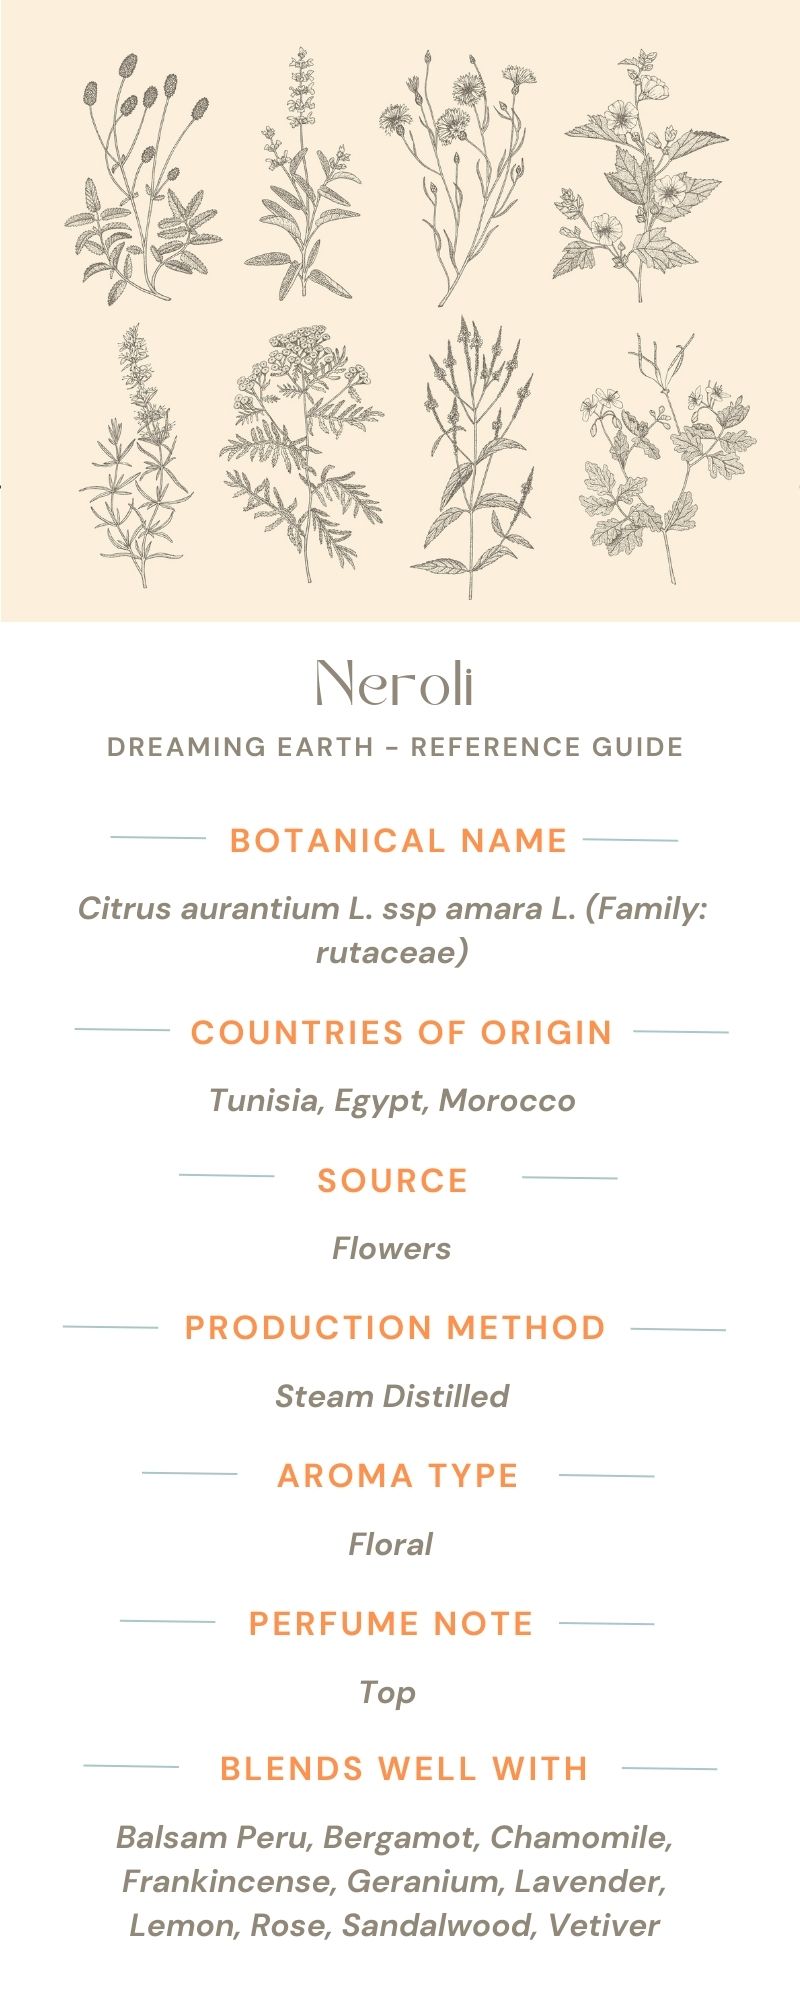 Load image into Gallery viewer, Neroli Essential Oil - Dreaming Earth Inc
